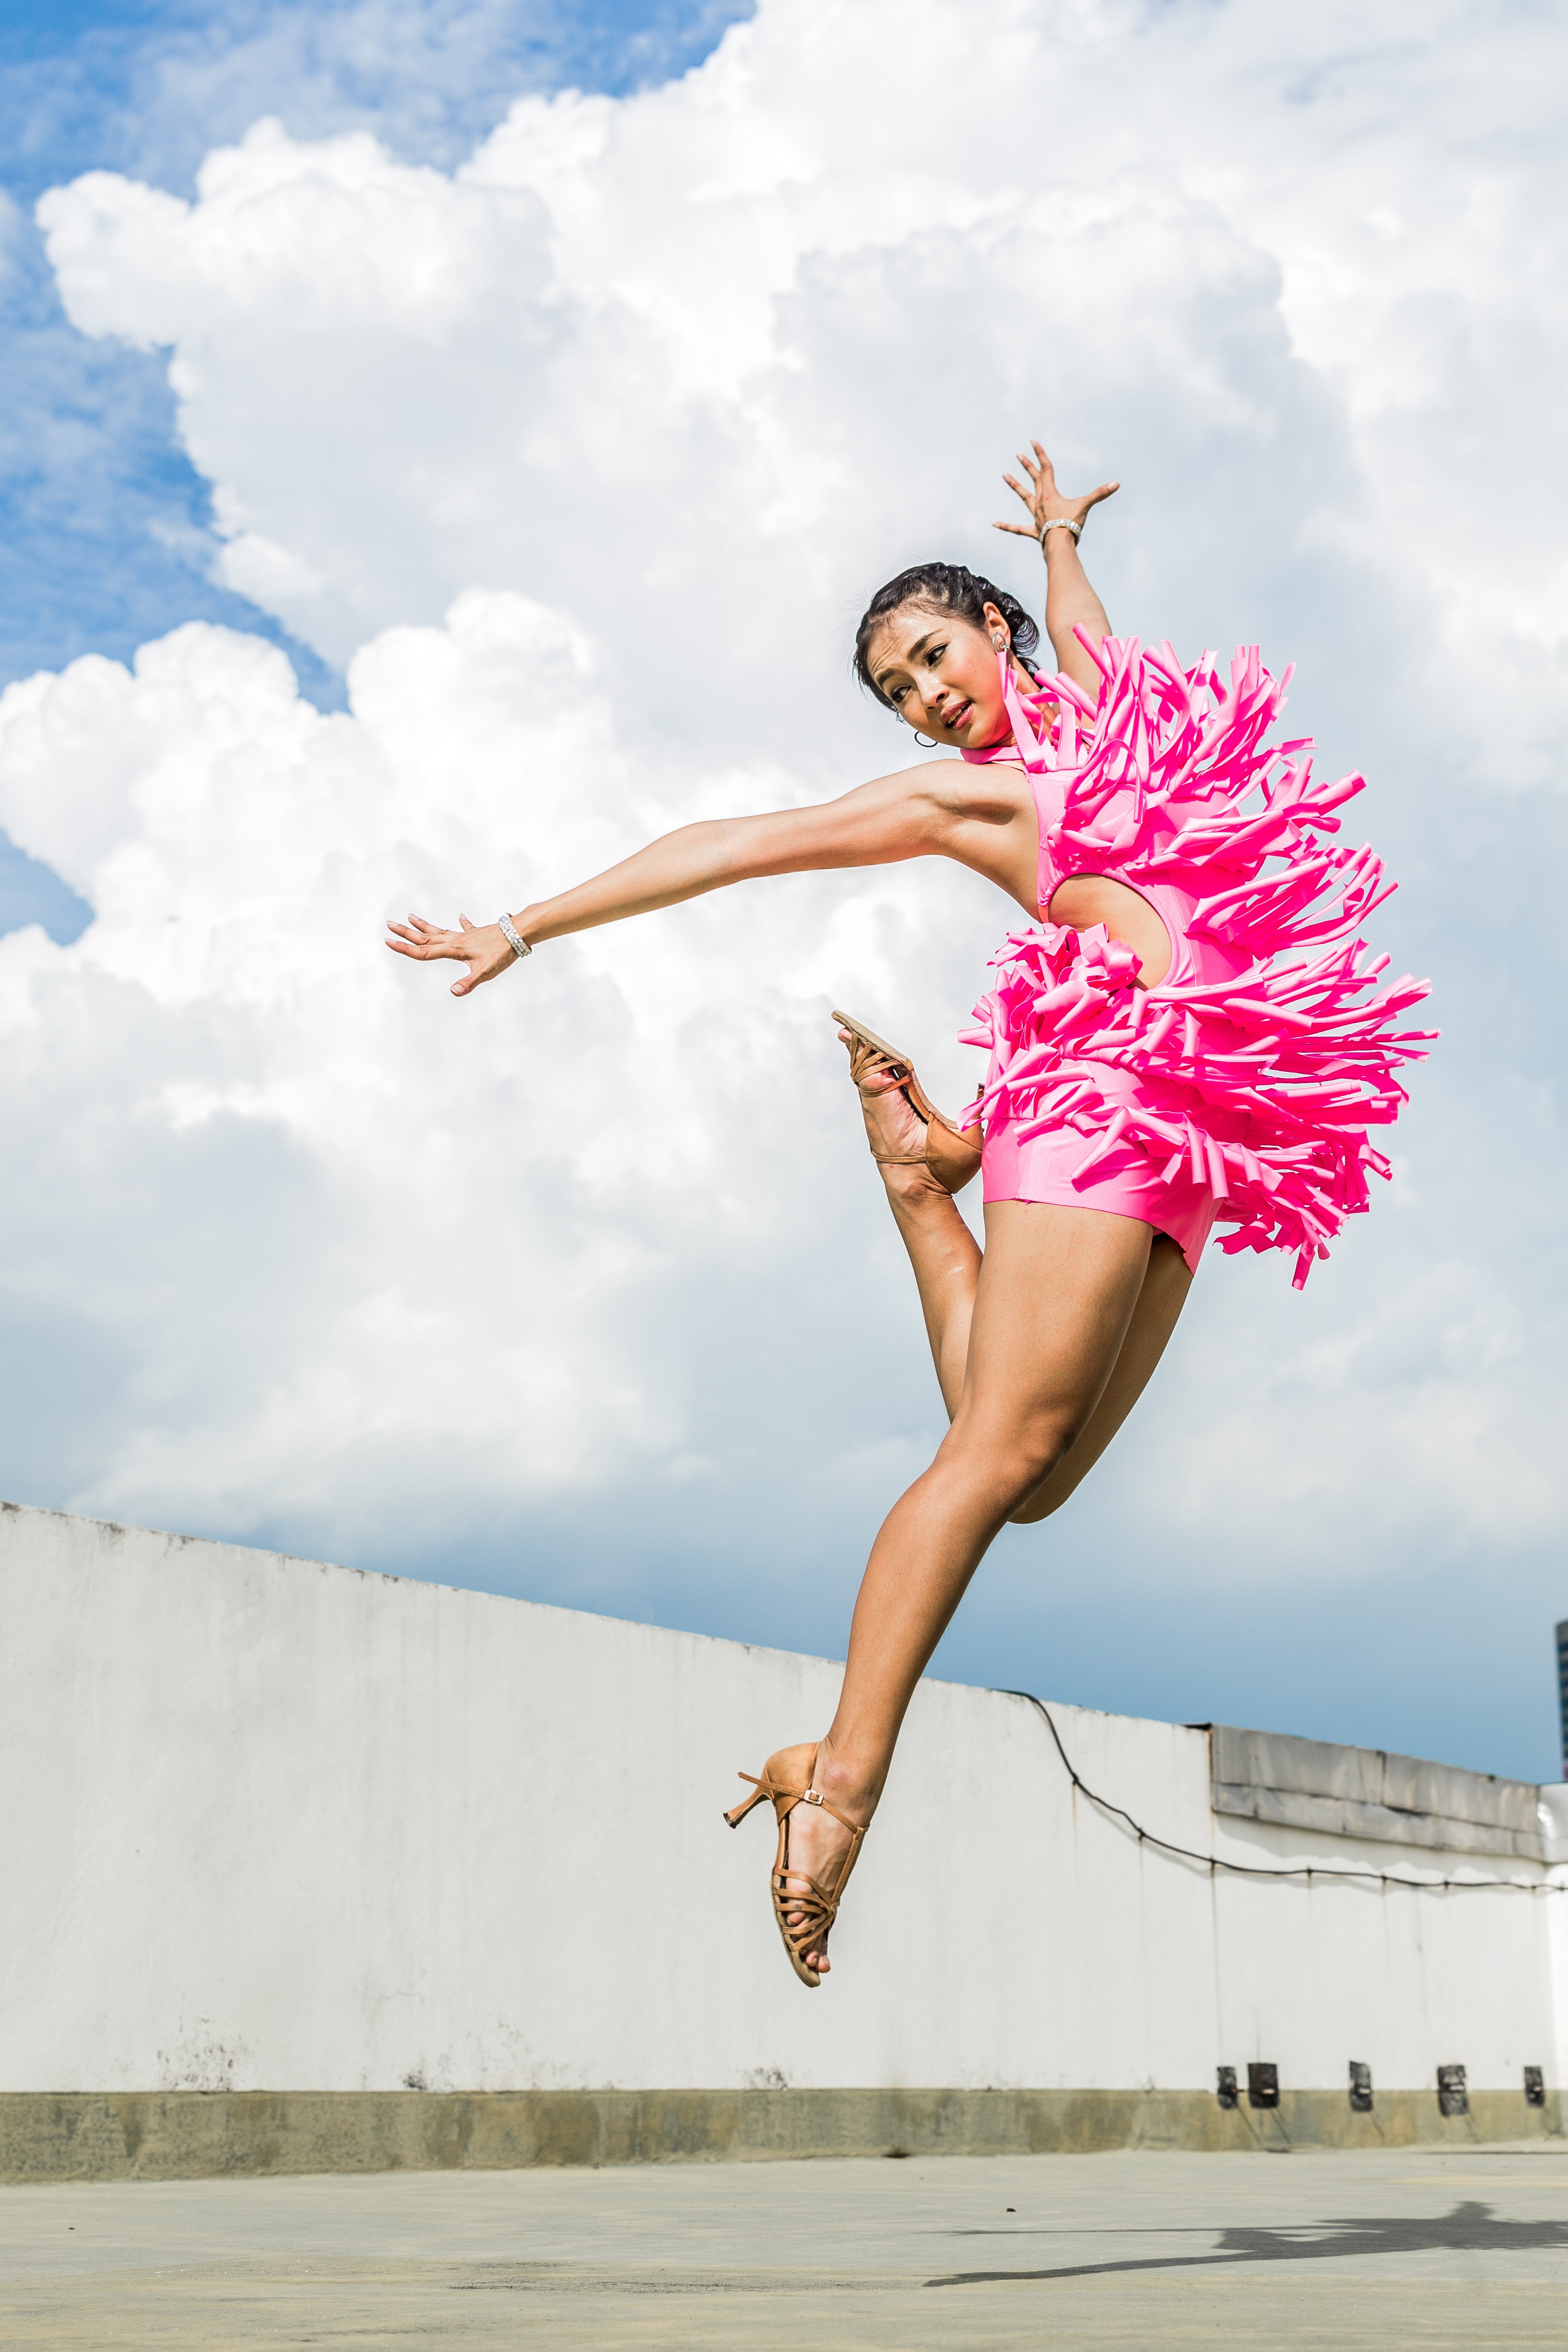 Woman in Pink Dress Doing Jump Shot While Extending Arms Under White Clouds, Active, Jumpshot, Wear, Summer, HQ Photo